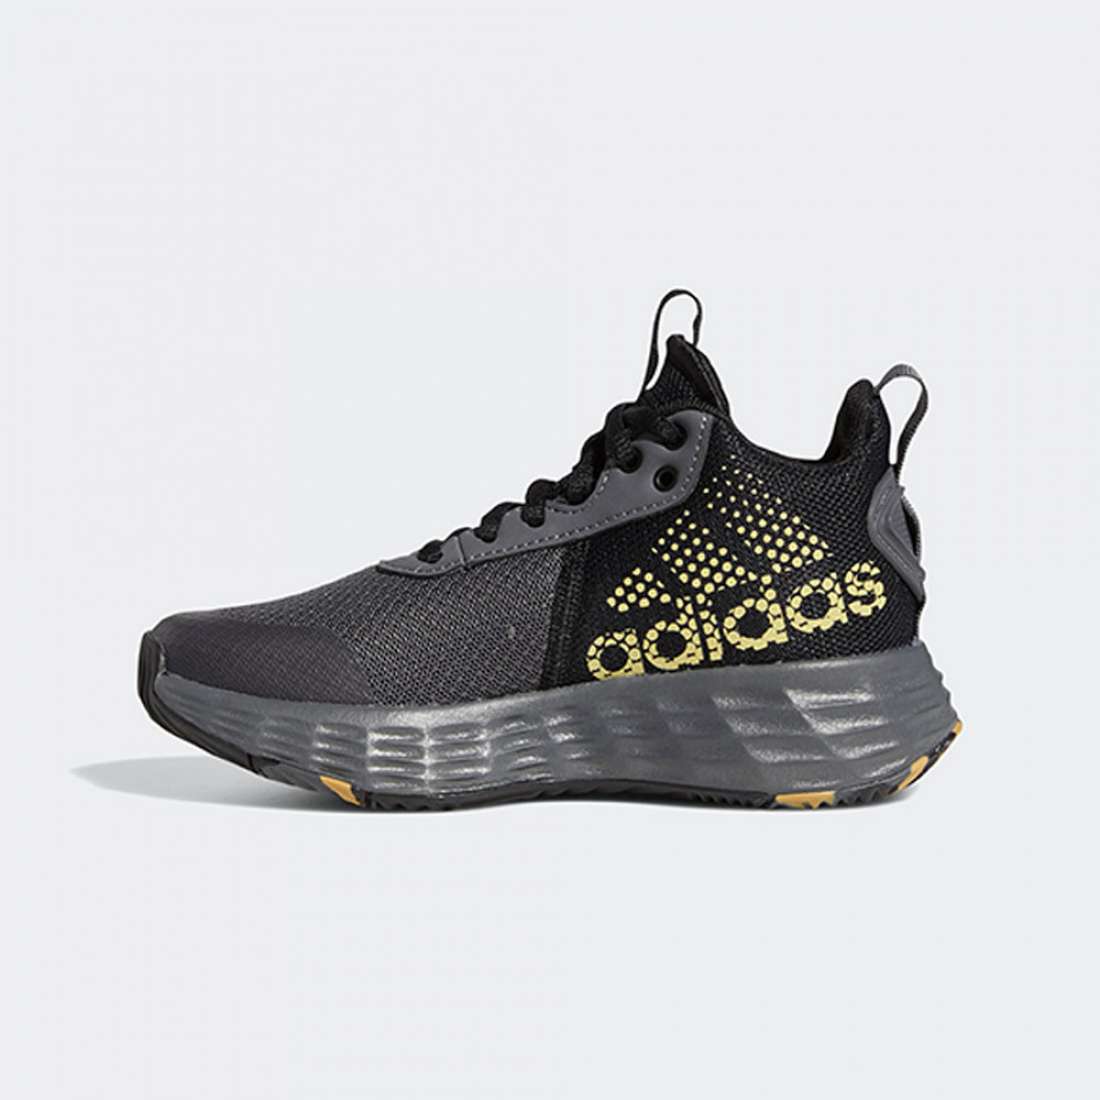 ADIDAS OWN THE GAME 2.0 GREFIV/MAGOLD/BLACK